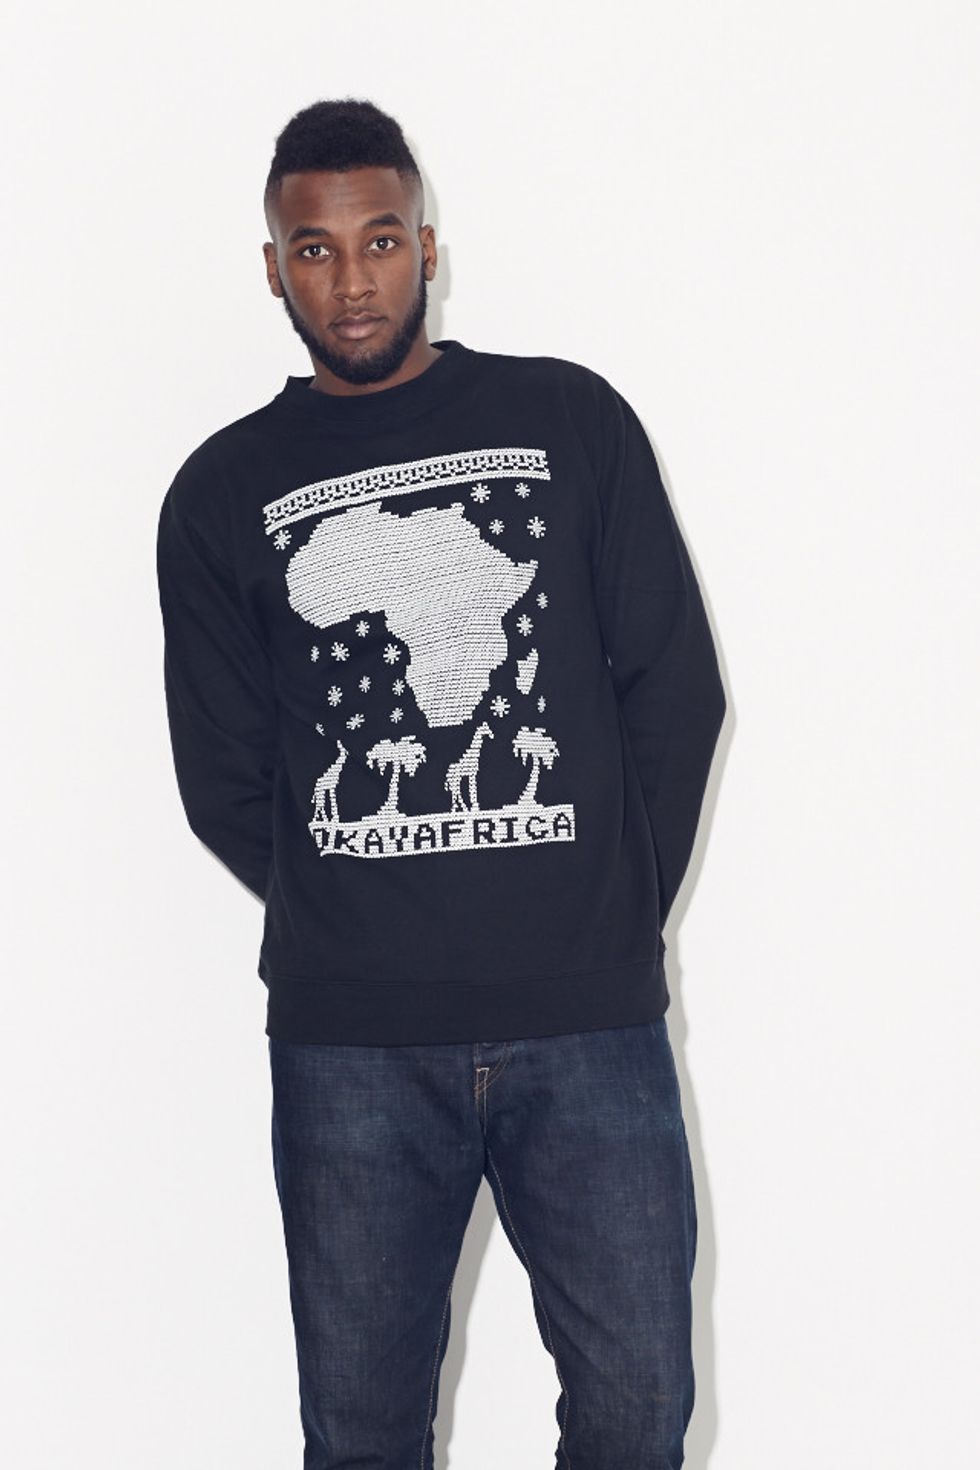 It Snows In Africa! - The Okayafrica Holiday Sweatshirt Available Now